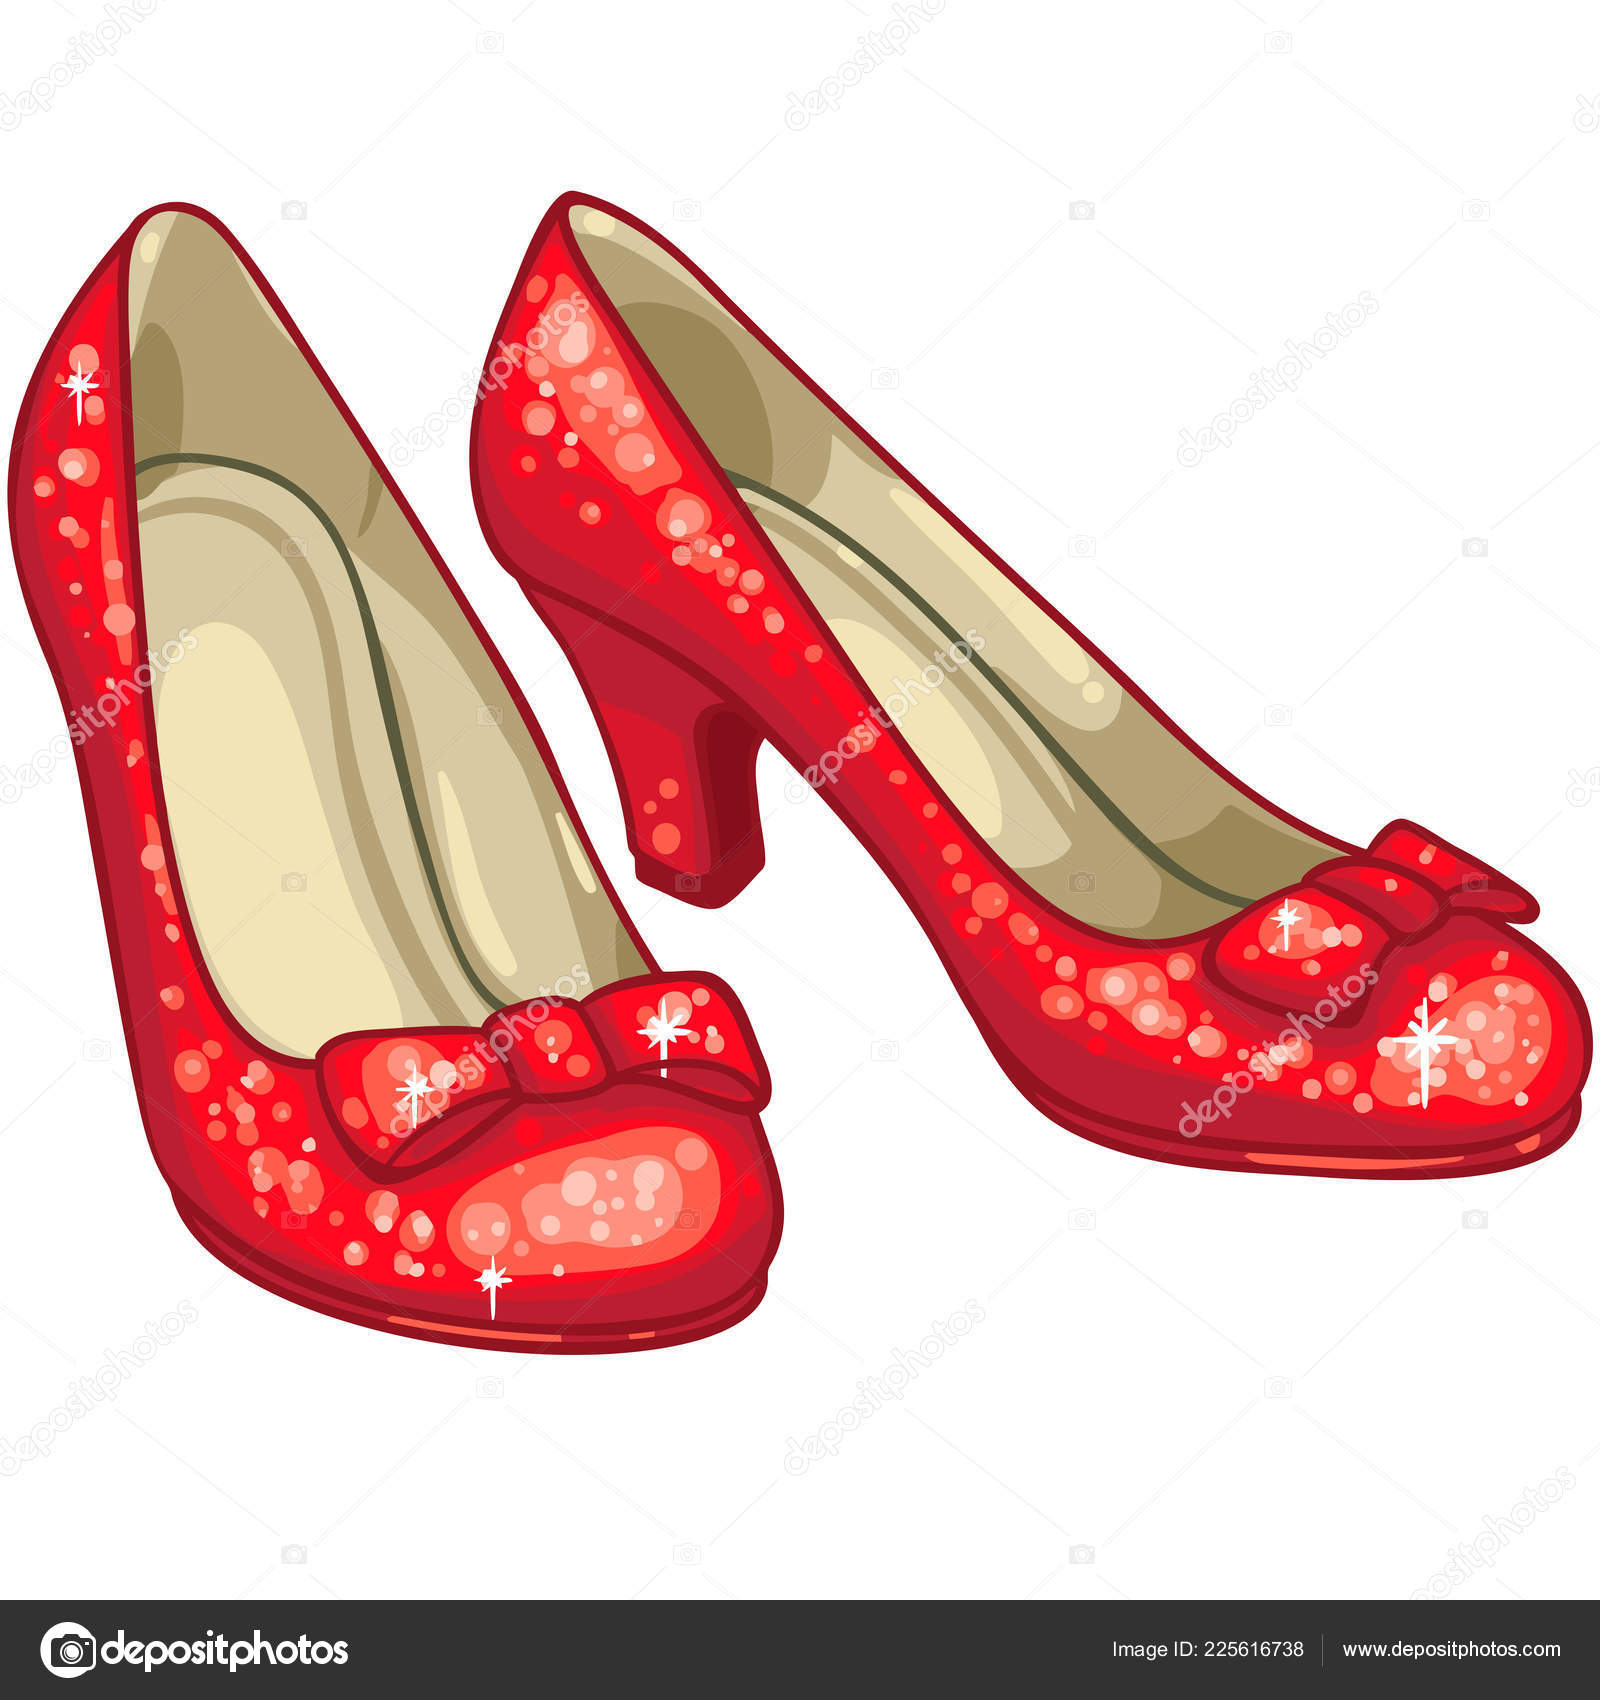 Red Slippers Ruby Sparkly Glitter 